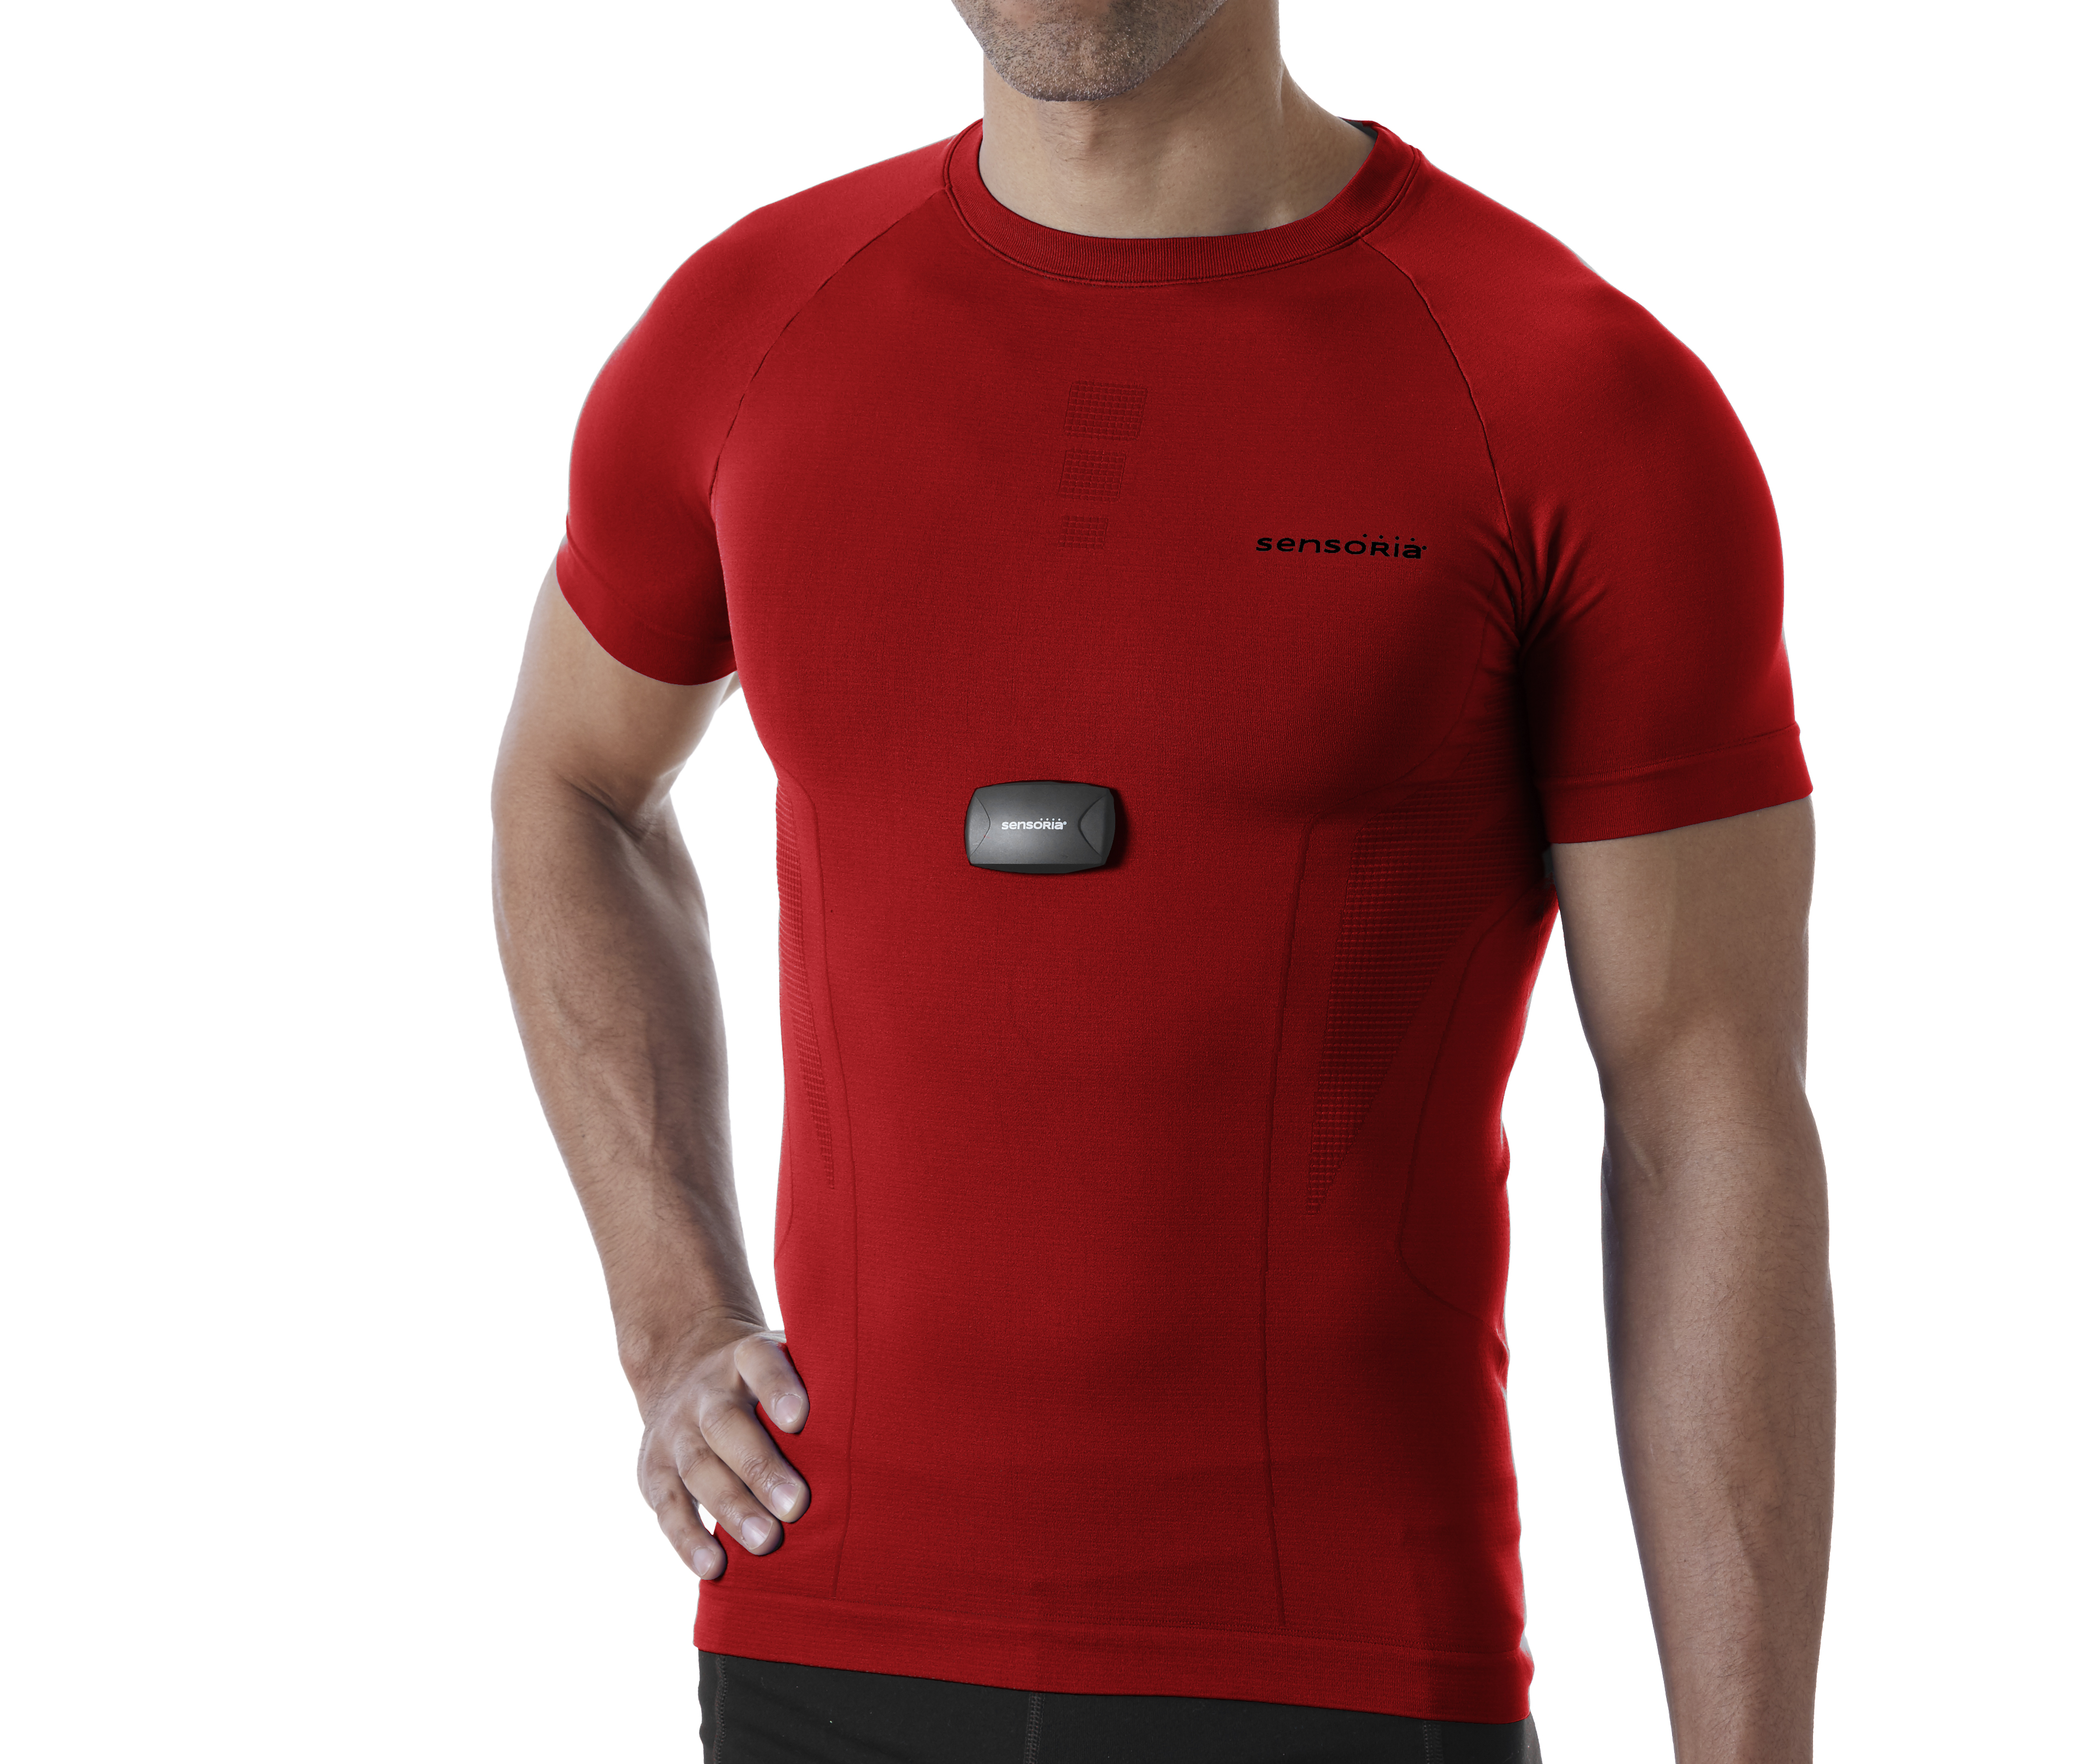 Sensoria is also expanding its collection of smart upper body garments. © Sensoria 